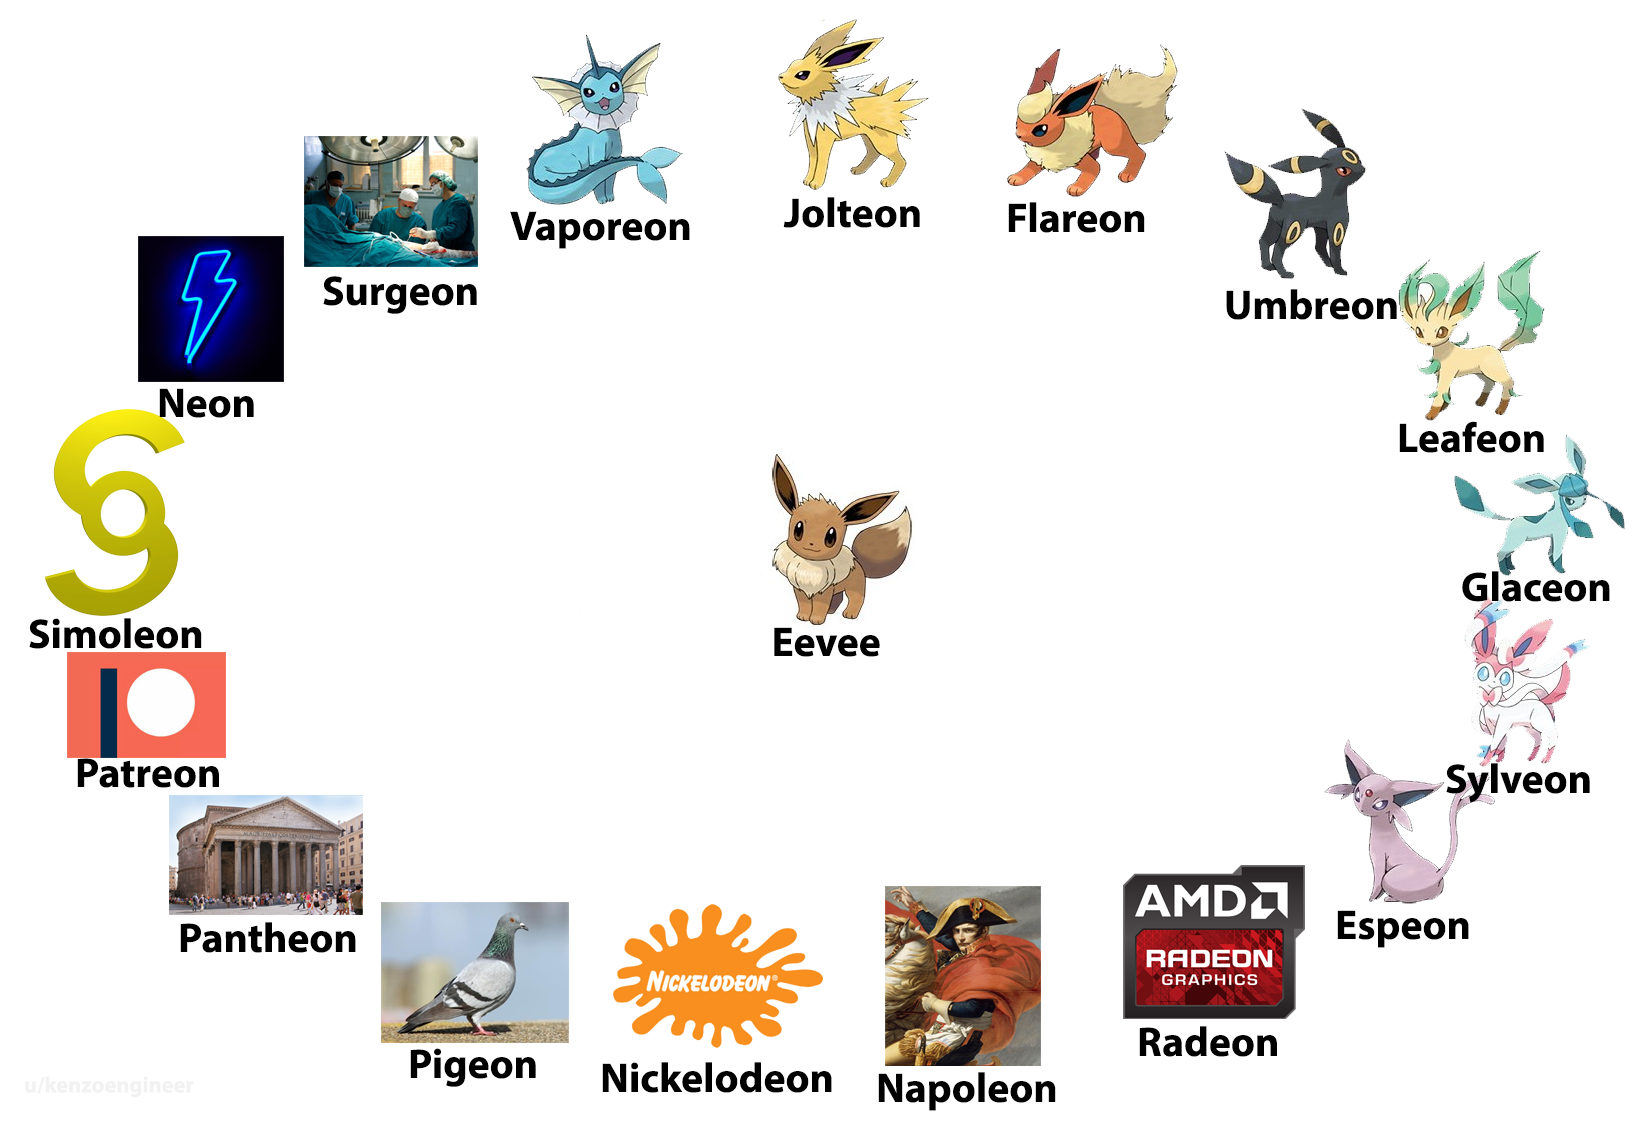 All Possible Eevee-lutions